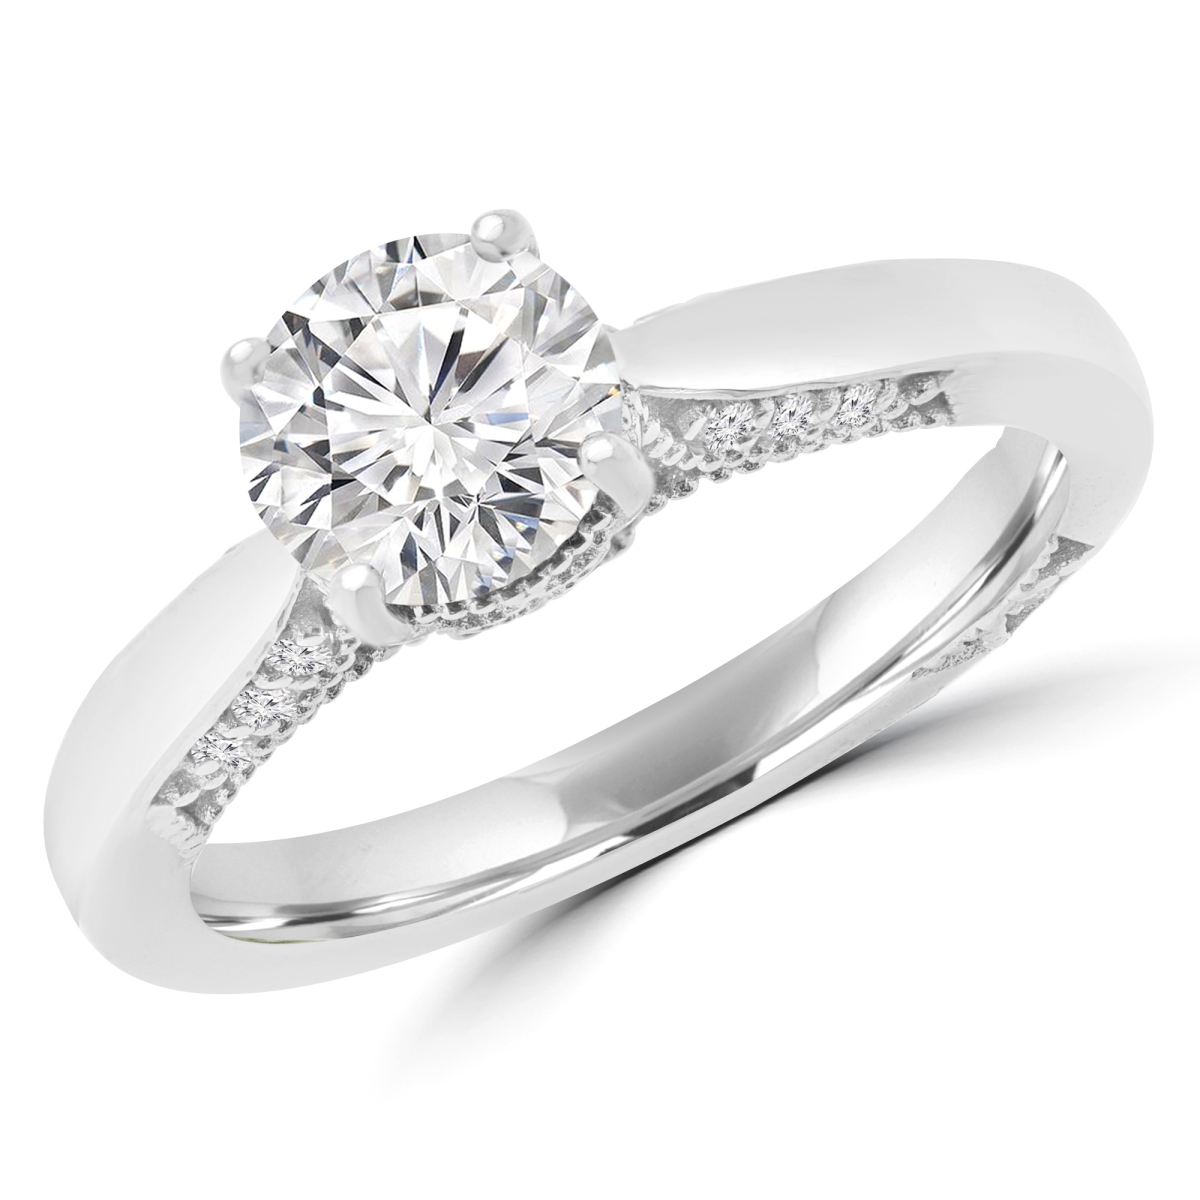 Picture of Majesty Diamonds MD170228-8 1.12 CTW Round Diamond Solitaire with Accents Engagement Ring in 18K White Gold - Size 8